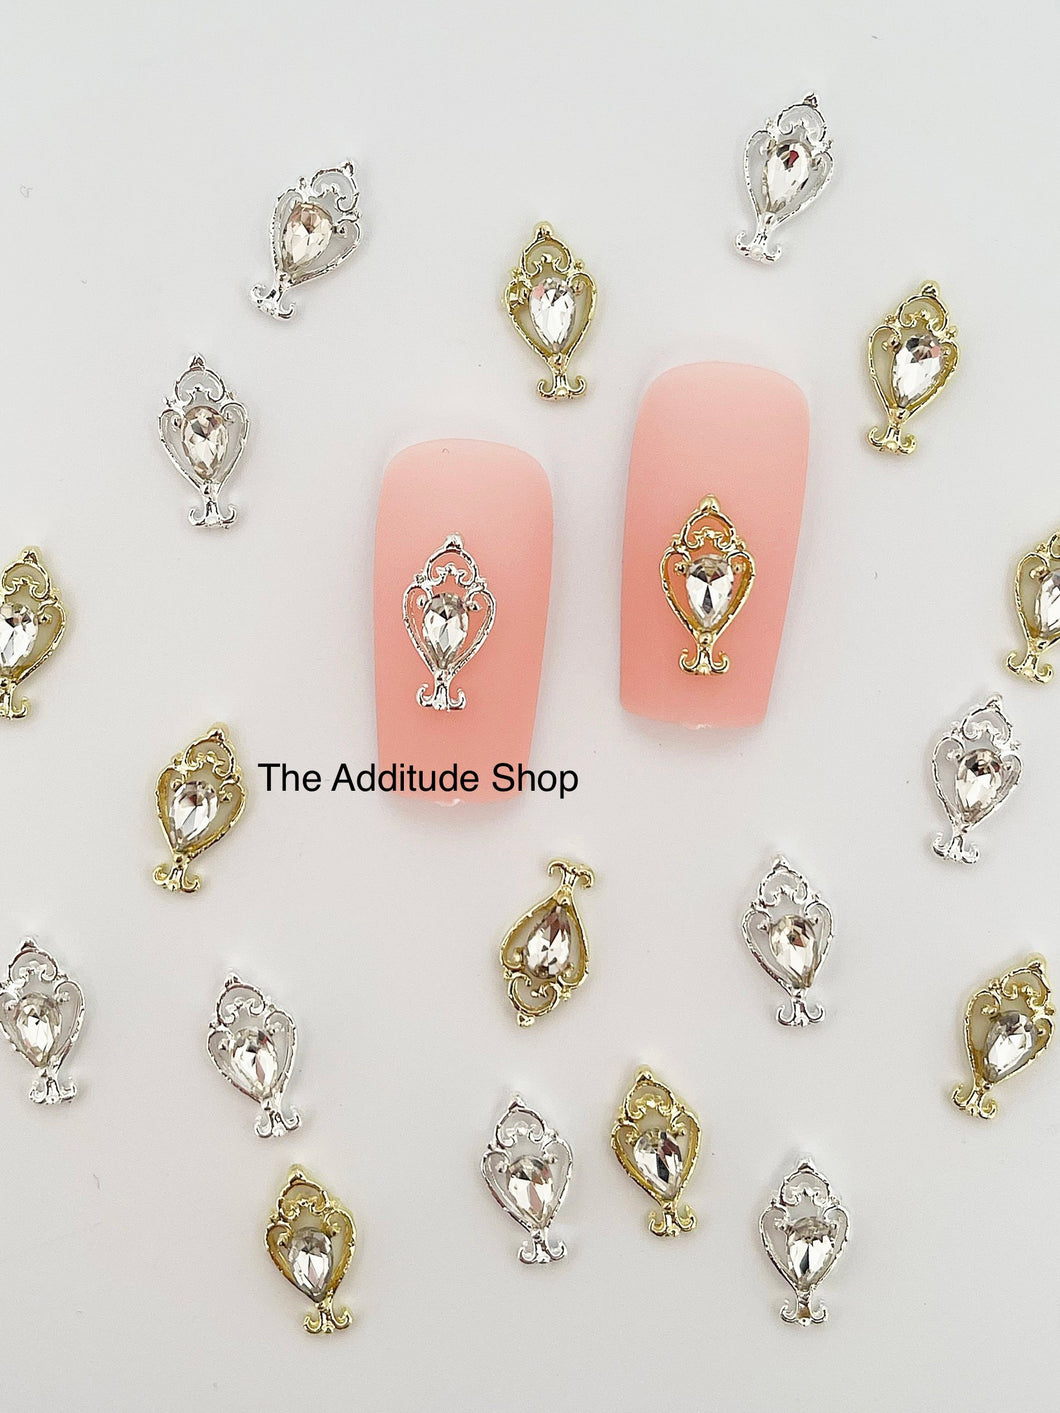 Alloy Nail 3D Charms #1 - 10 Pieces